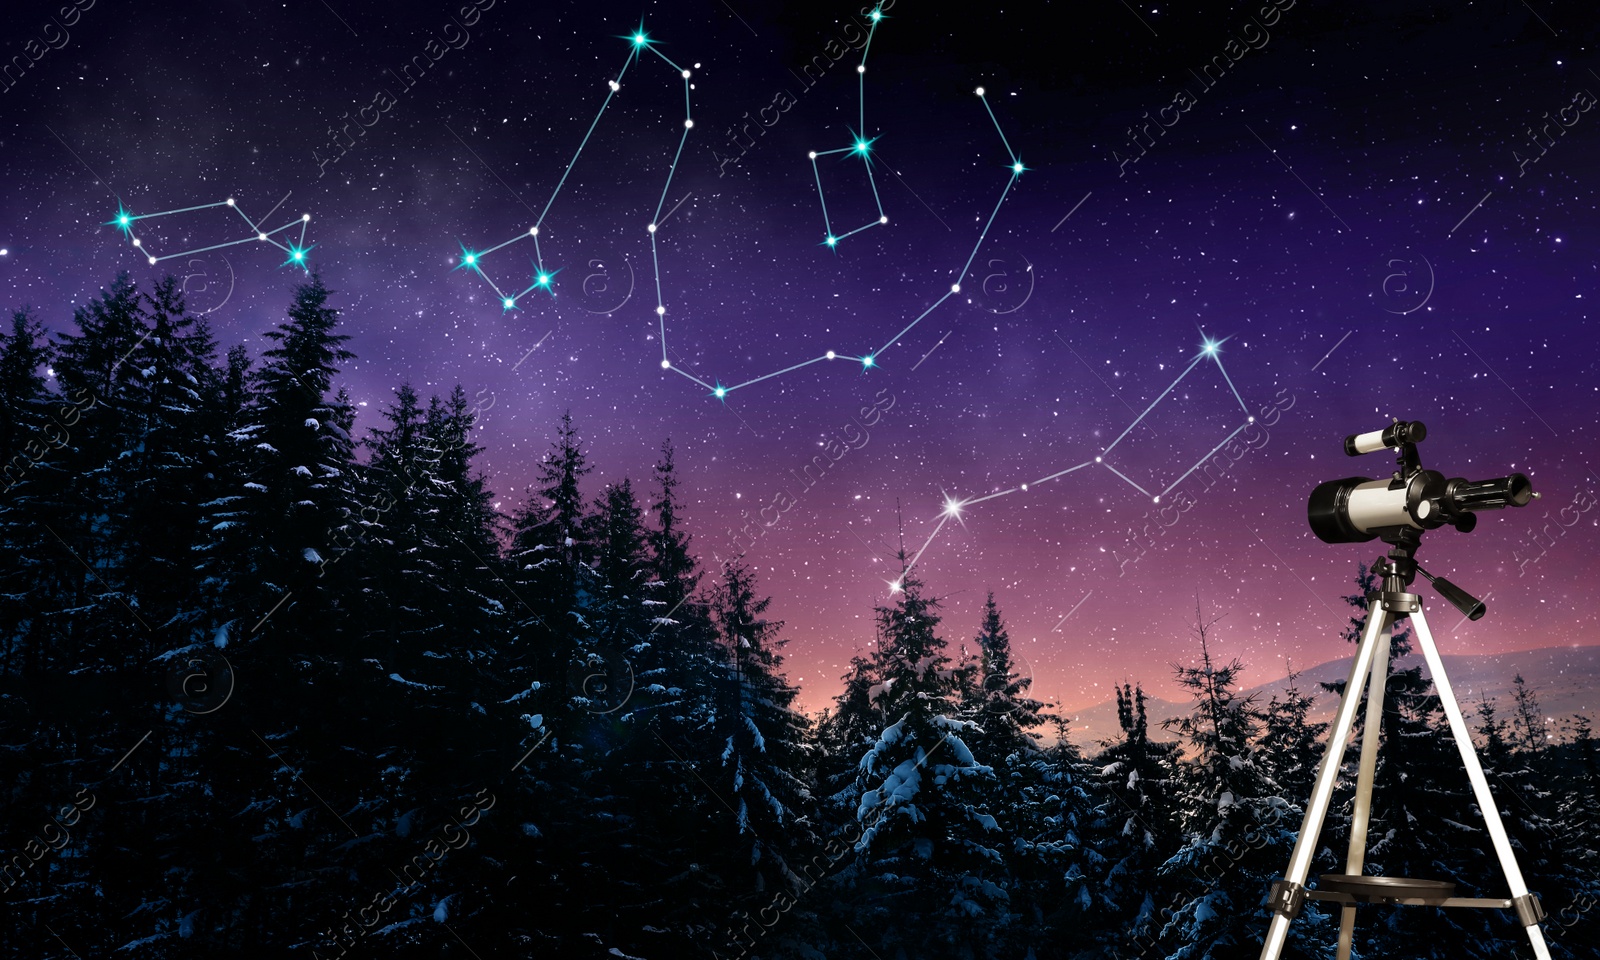 Image of Different constellations in starry sky over conifer forest at night. Stargazing with telescope